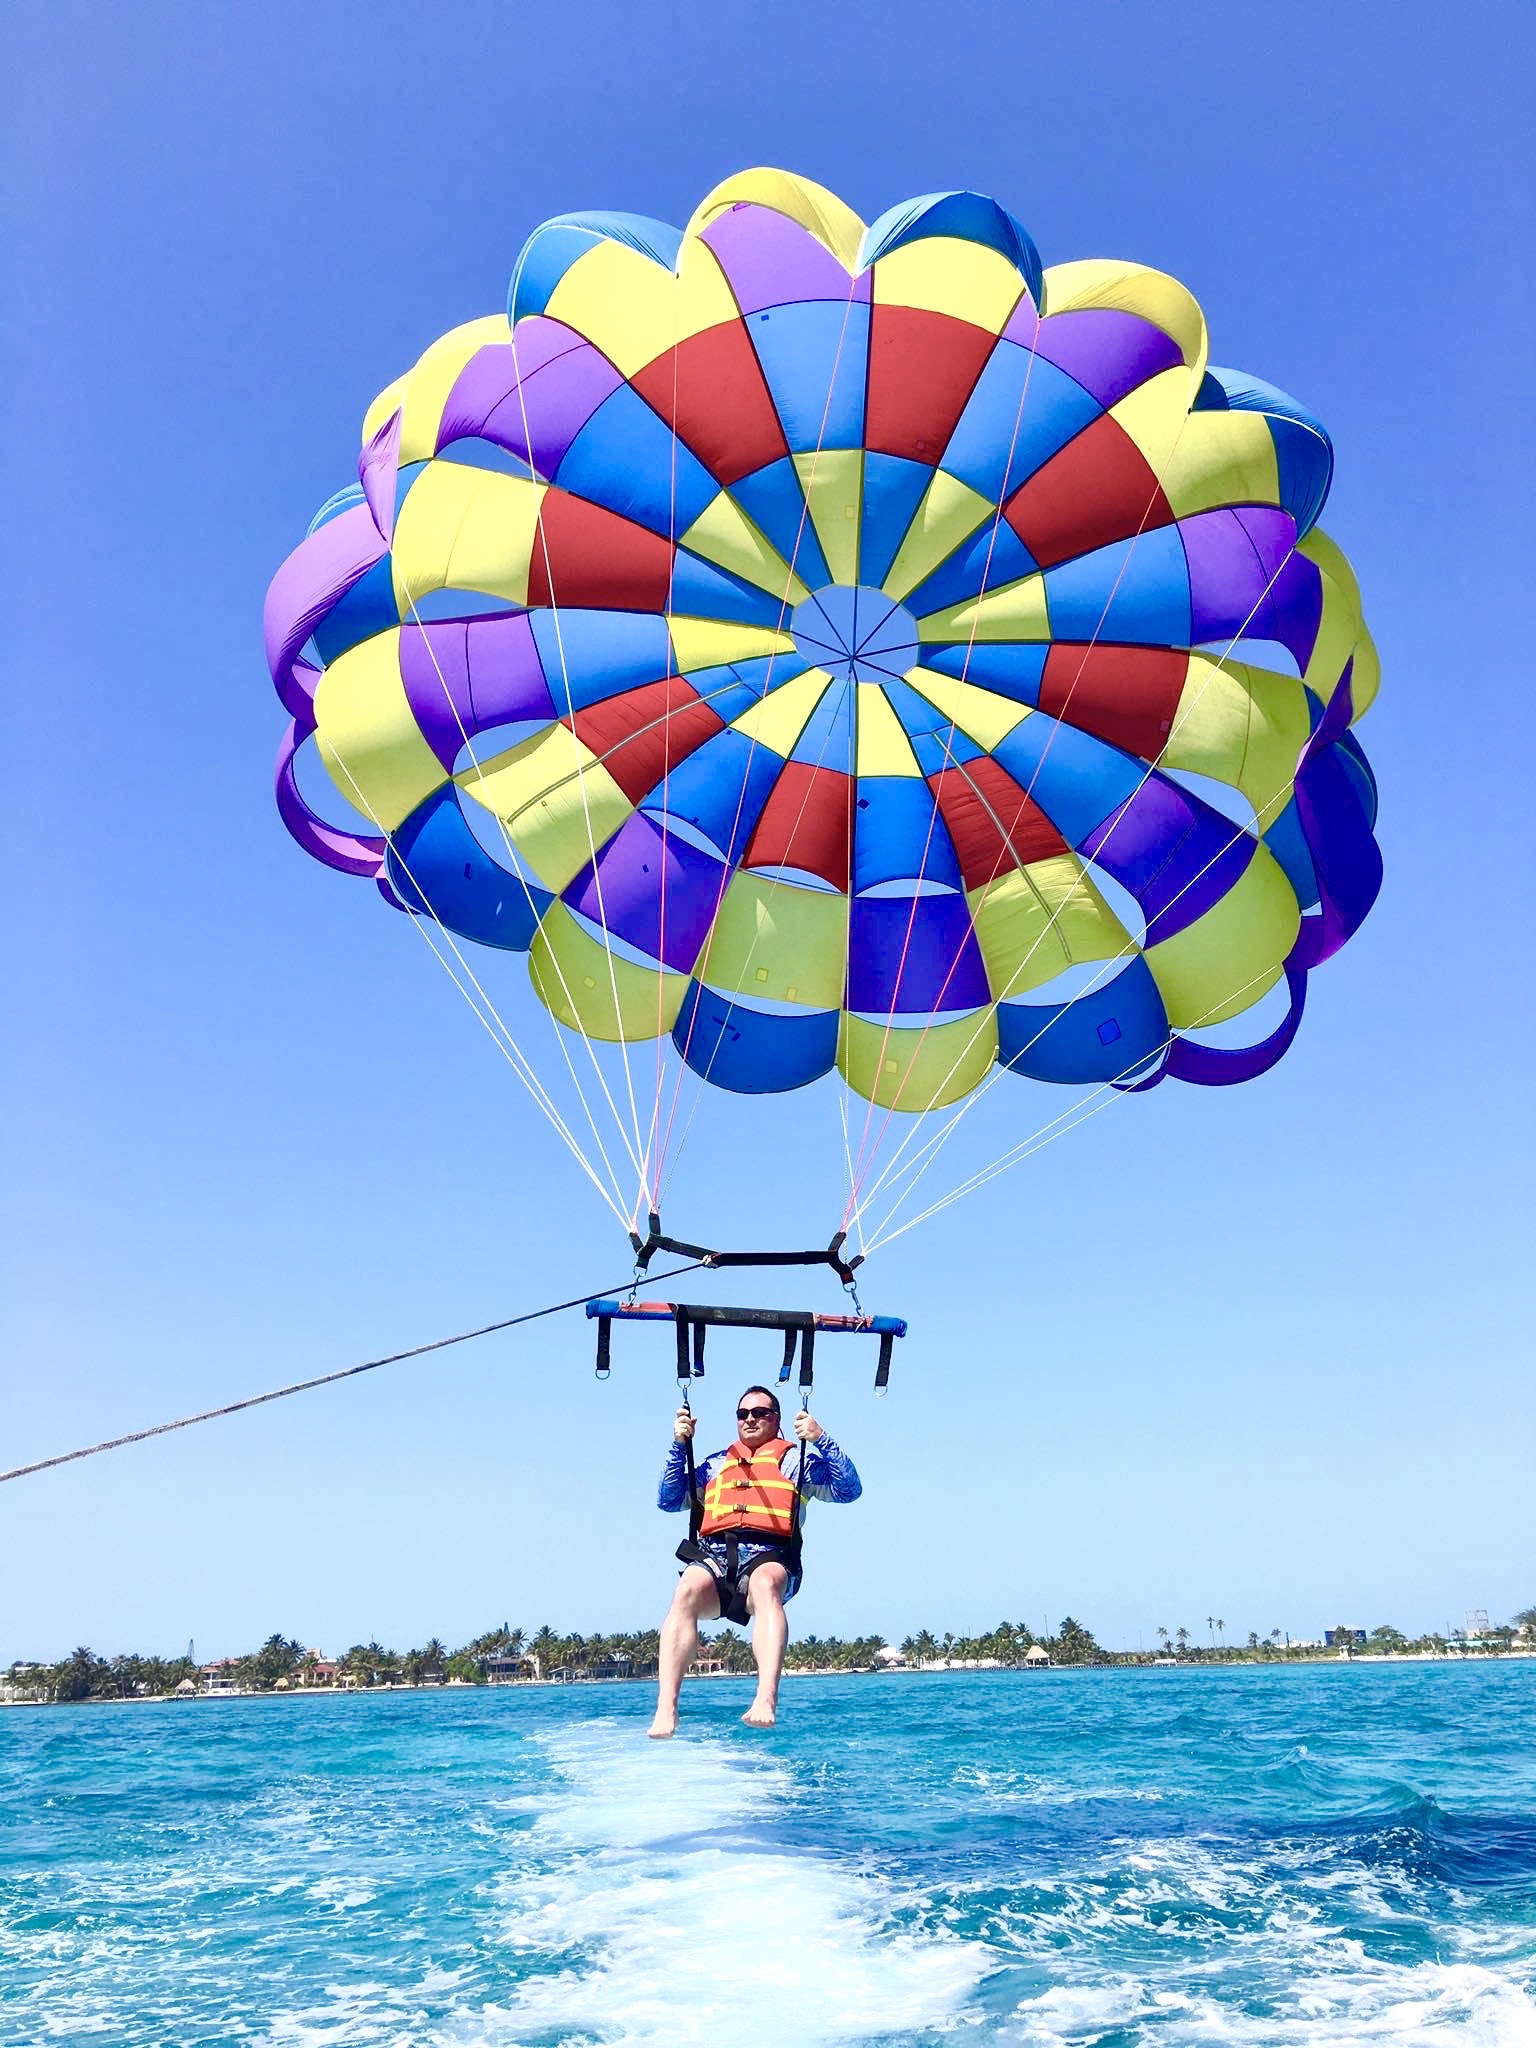 Parasail Gallery Adventures in Ambergris Caye